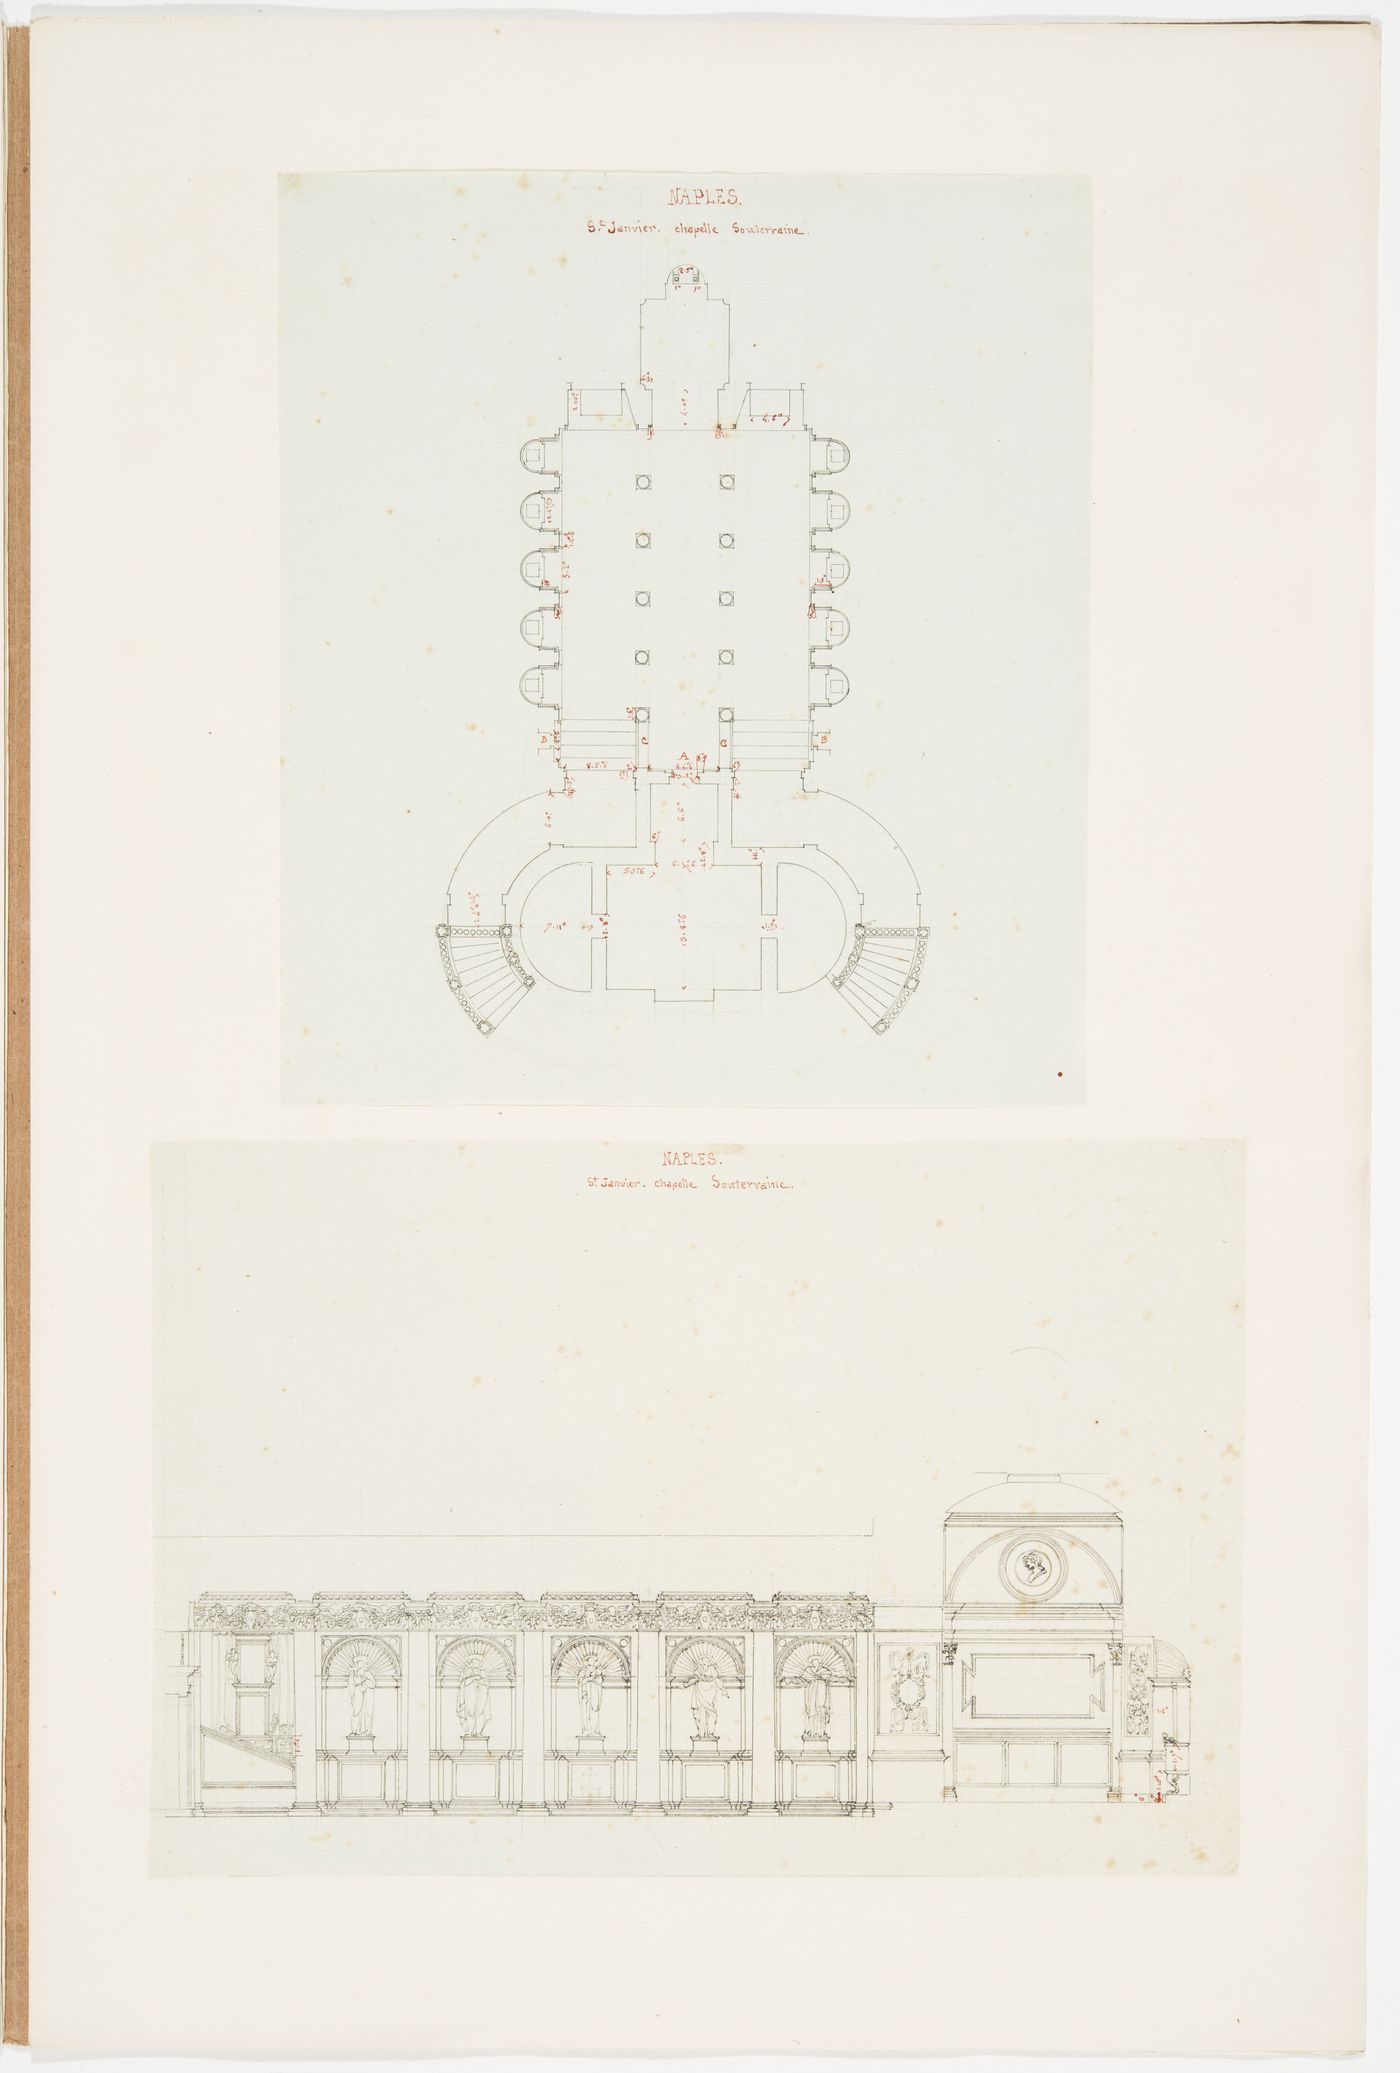 Ground plan of Cappella del Soccorso, Cathedral San Gennaro, Naples; Longitudinal section showing sculpture and details of the inter-columnar niches from Cappella del Soccorso, Cathedral San Gennaro, Naples